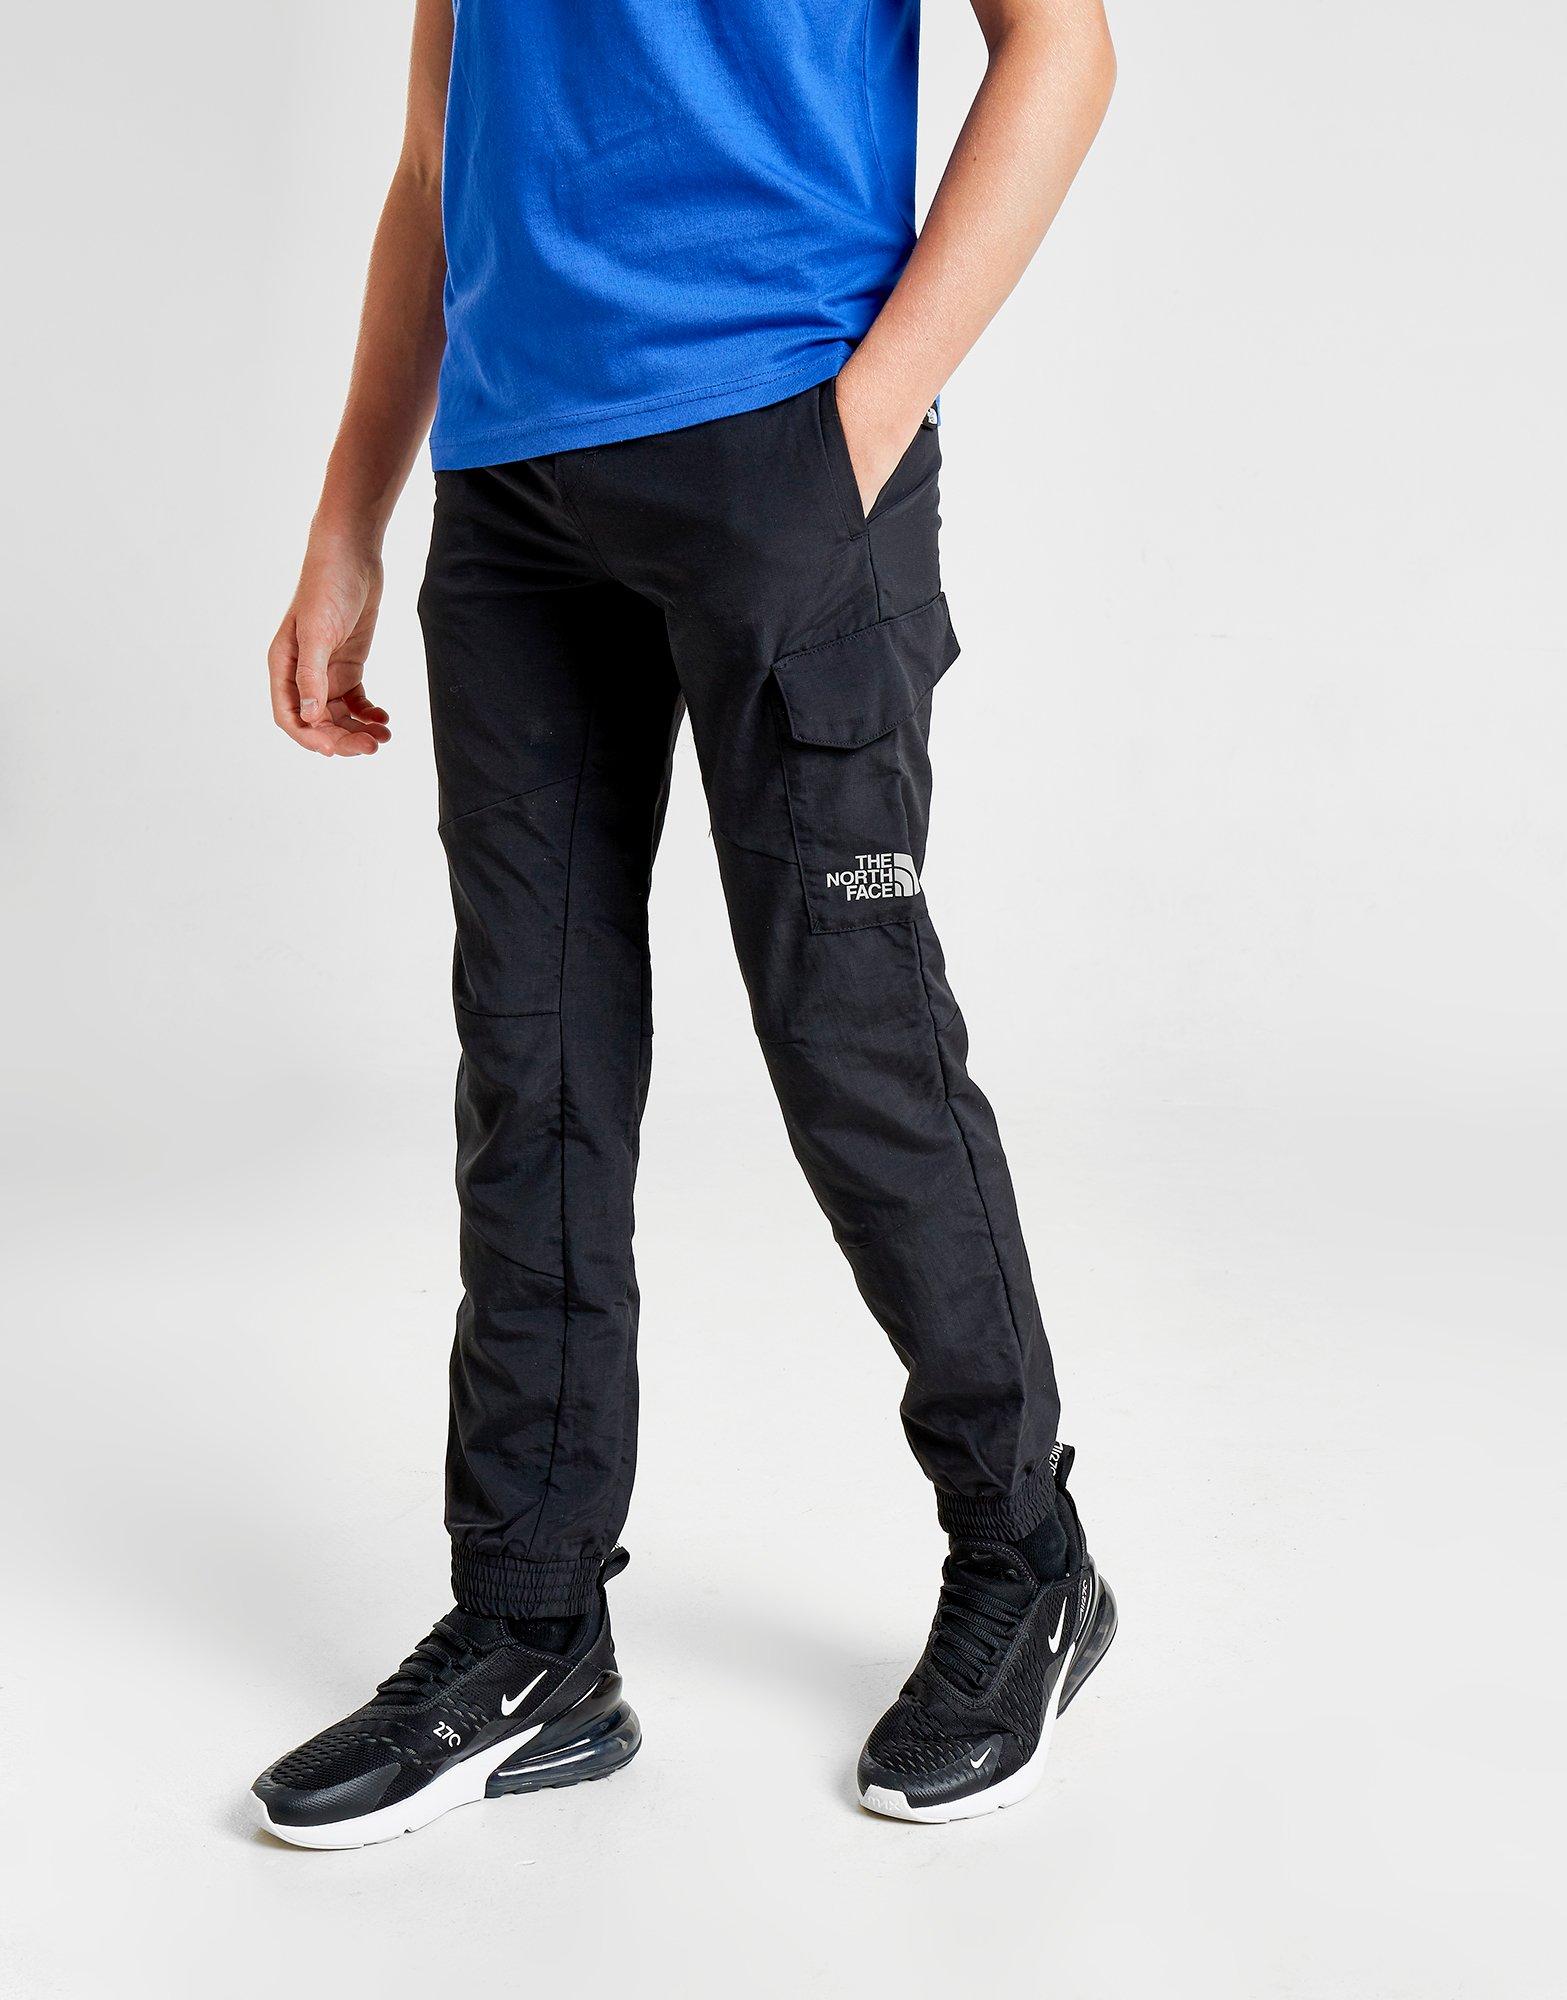 north face woven pants